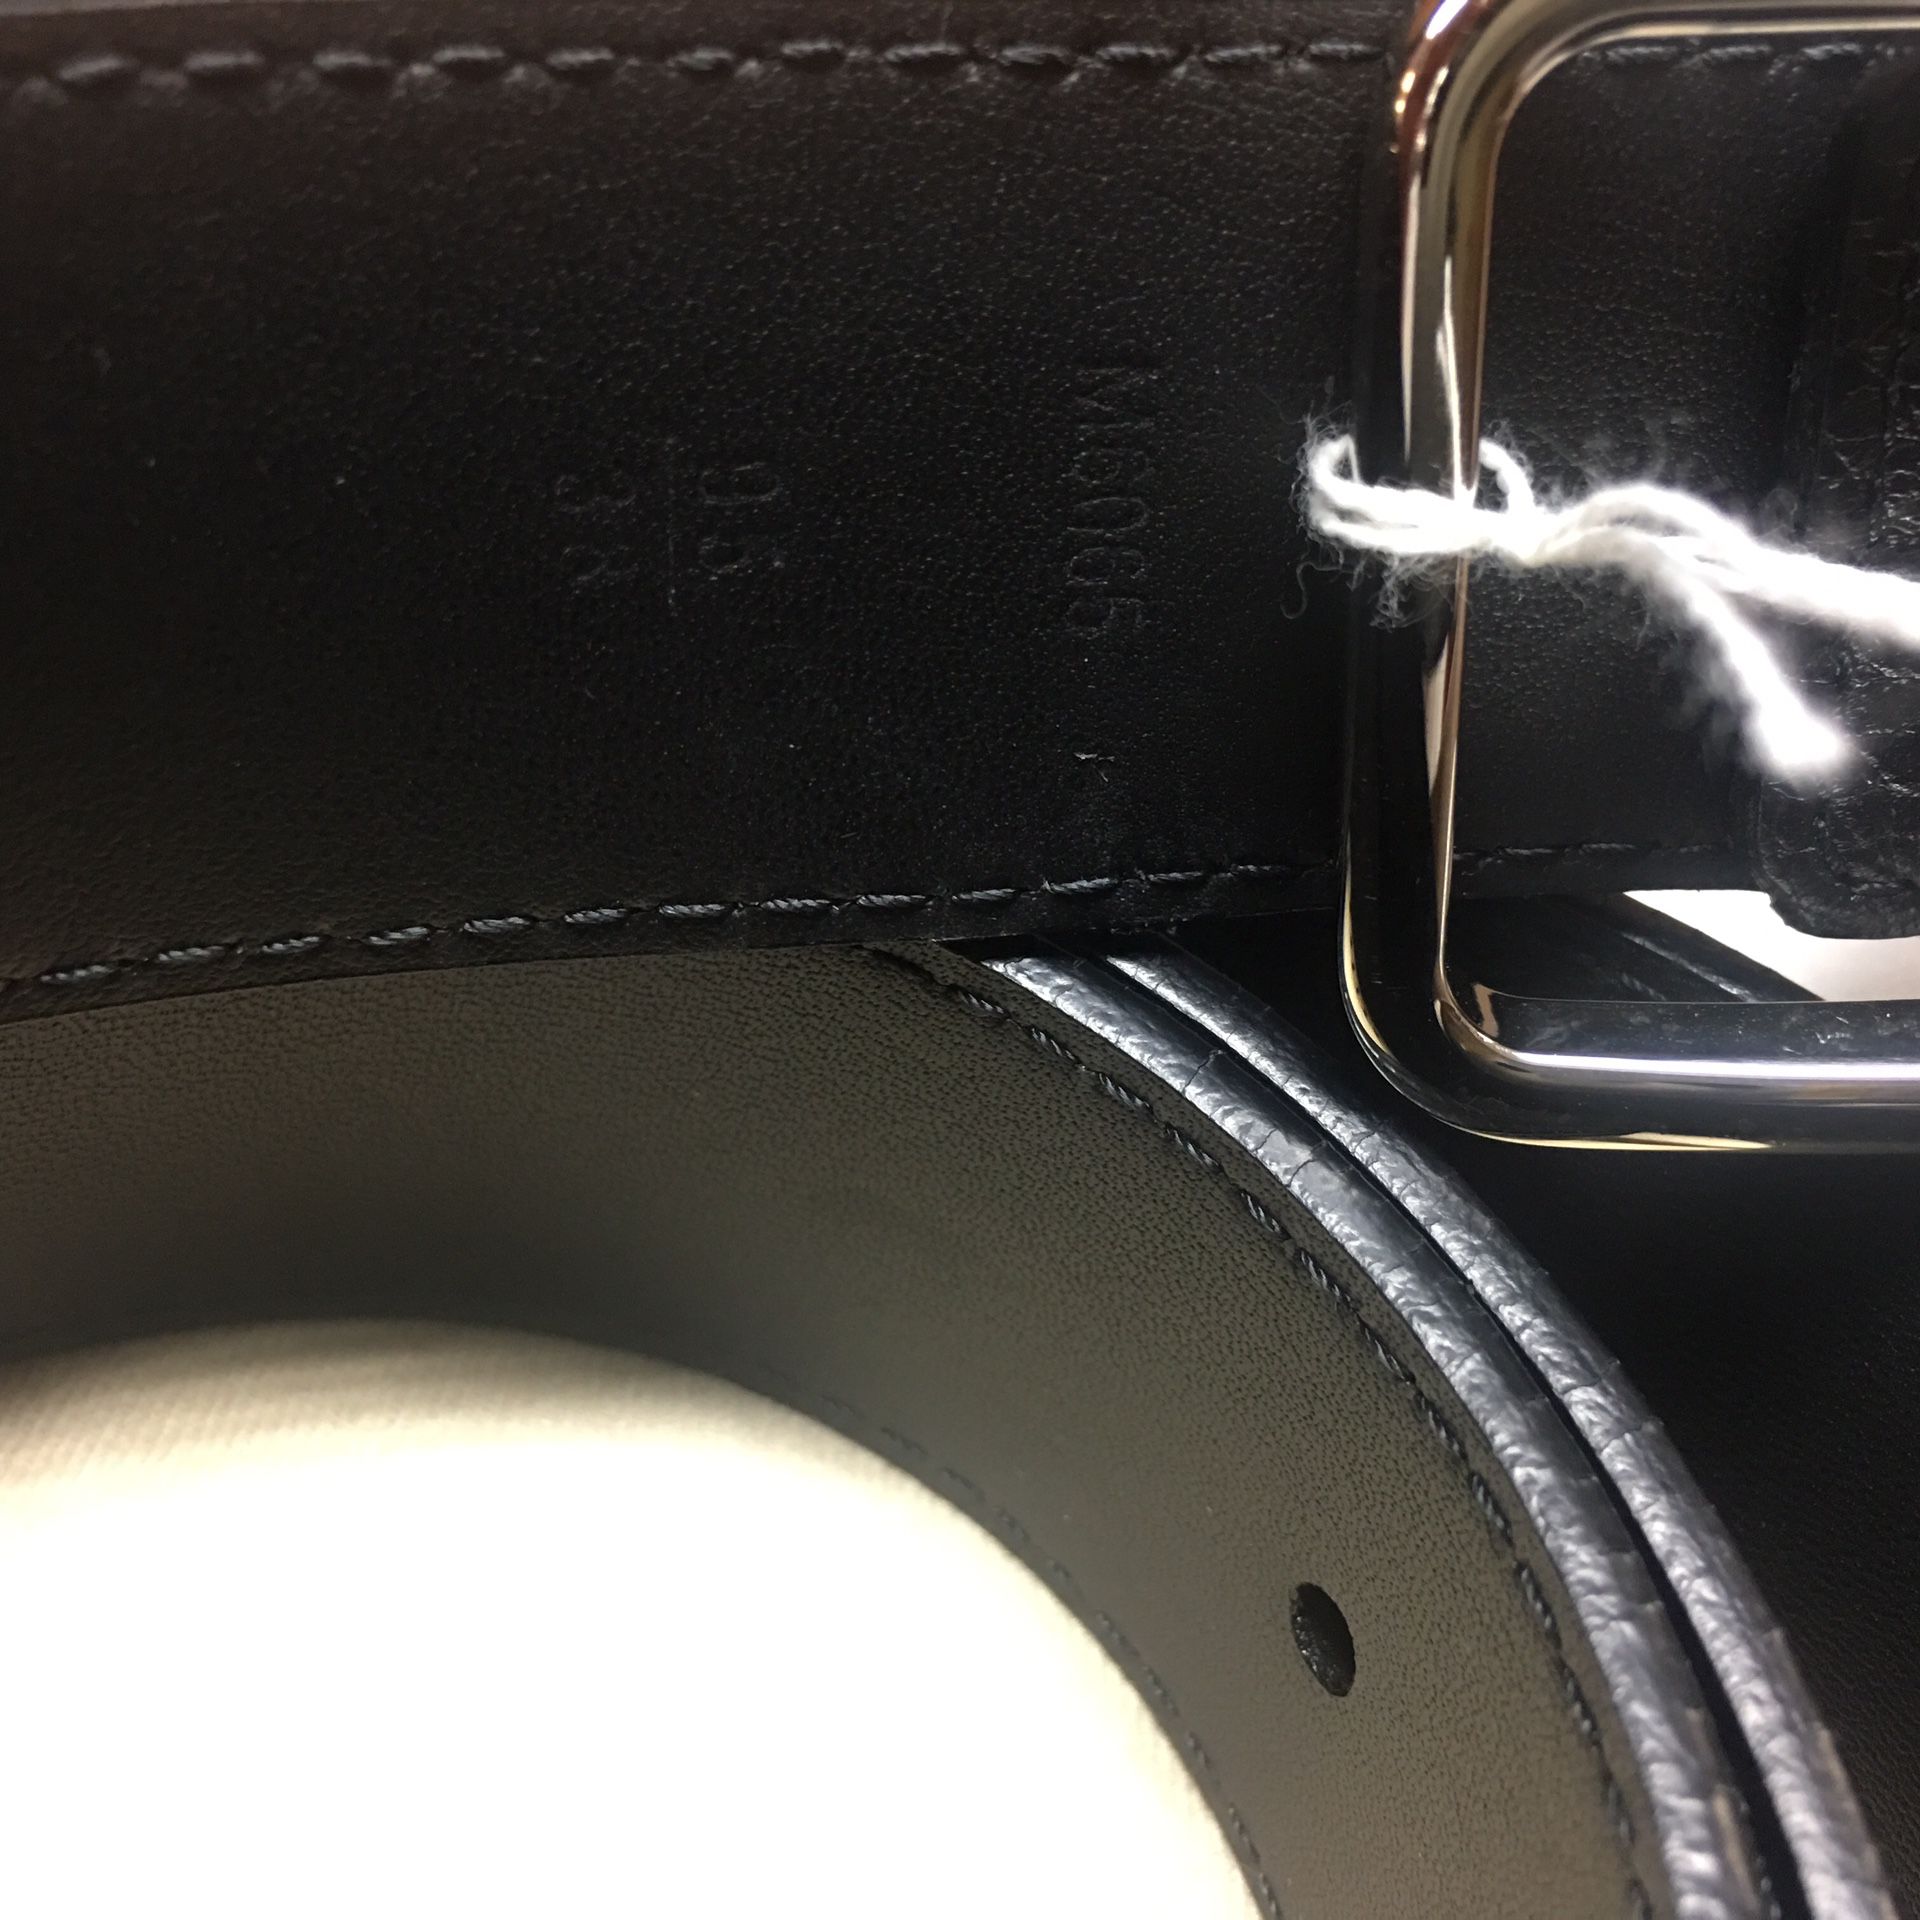 Lv Holographic Belt for Sale in Austin, TX - OfferUp